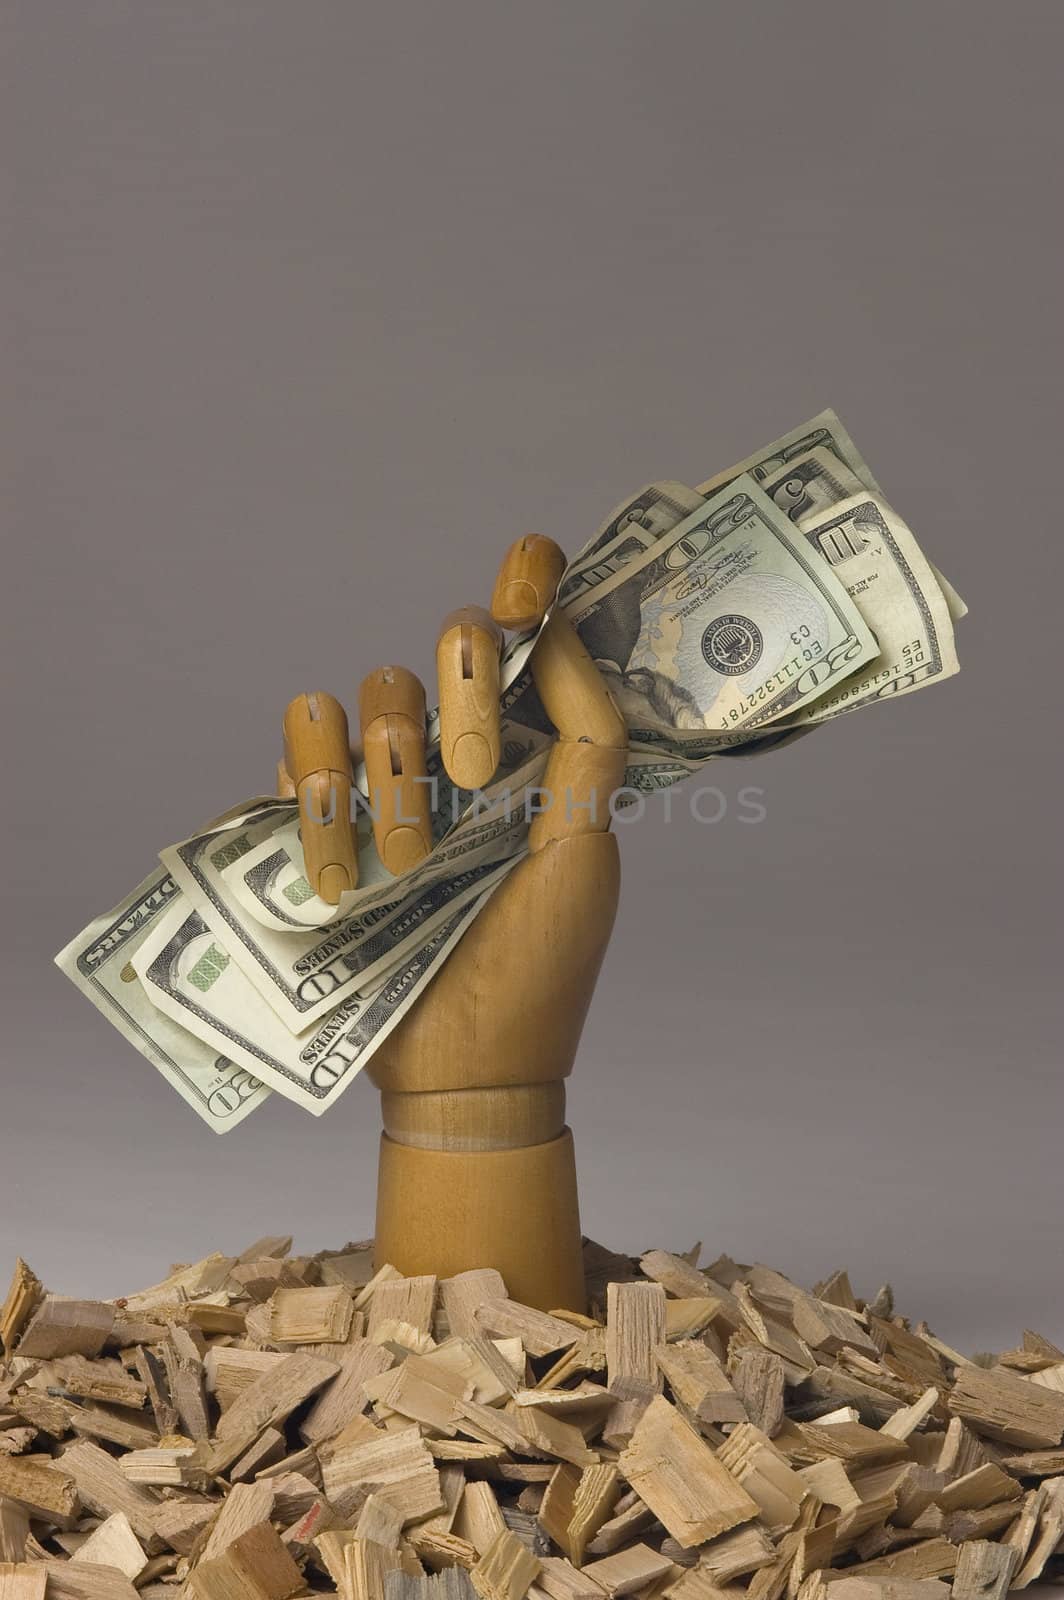 Wooden modelling hand standing in wood chips holding cash